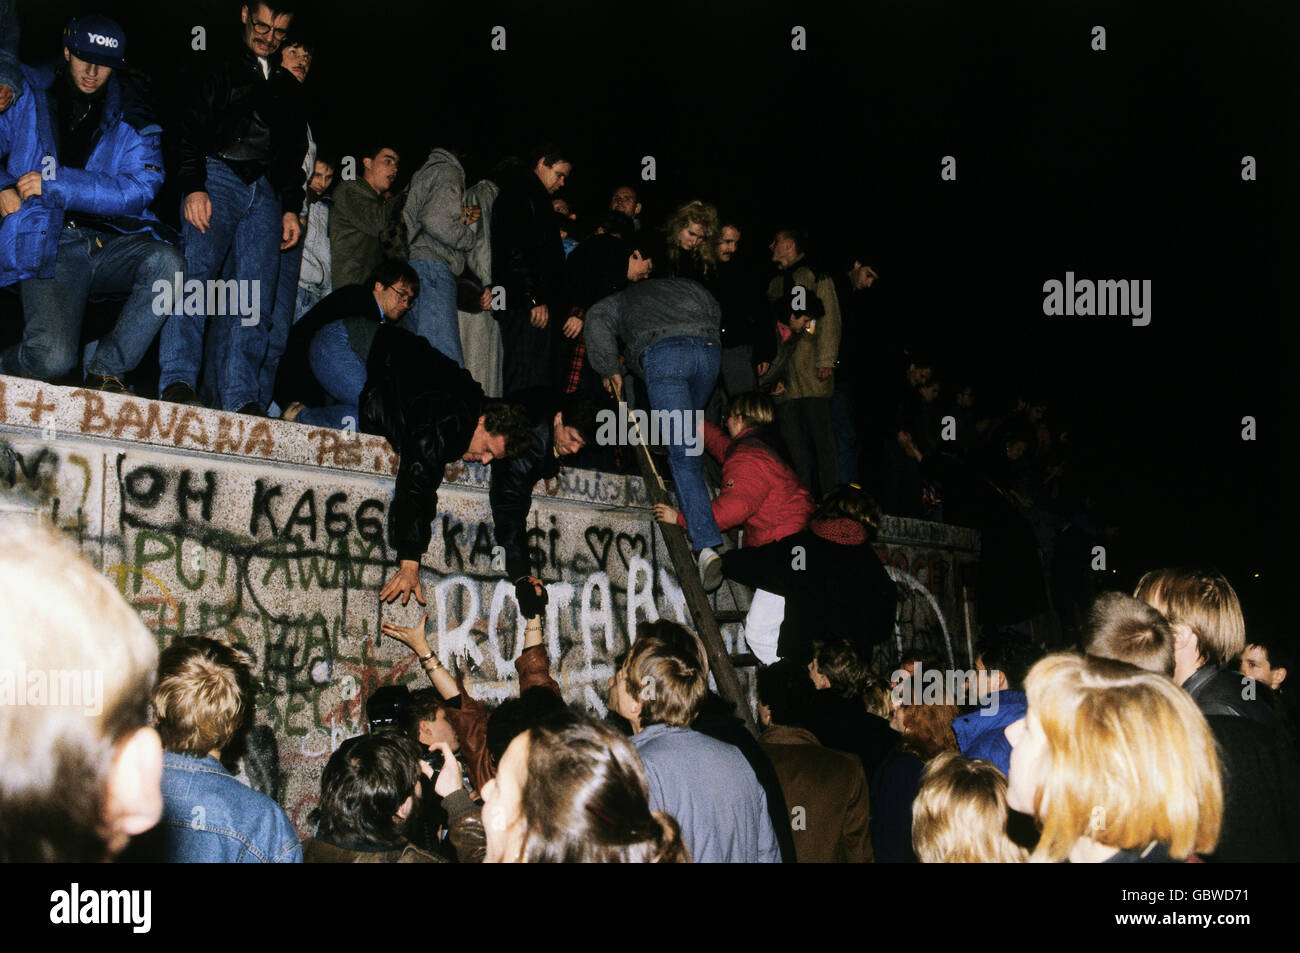 geography / travel, Germany, Fall of the Berlin Wall, people climbing on the Wall, Berlin, 9.11.1989, historic, historical, 20th century, 1980s, 80s, opening, down, November'89, November 89, East Germany, East-Germany, German border, Additional-Rights-Clearences-Not Available Stock Photo